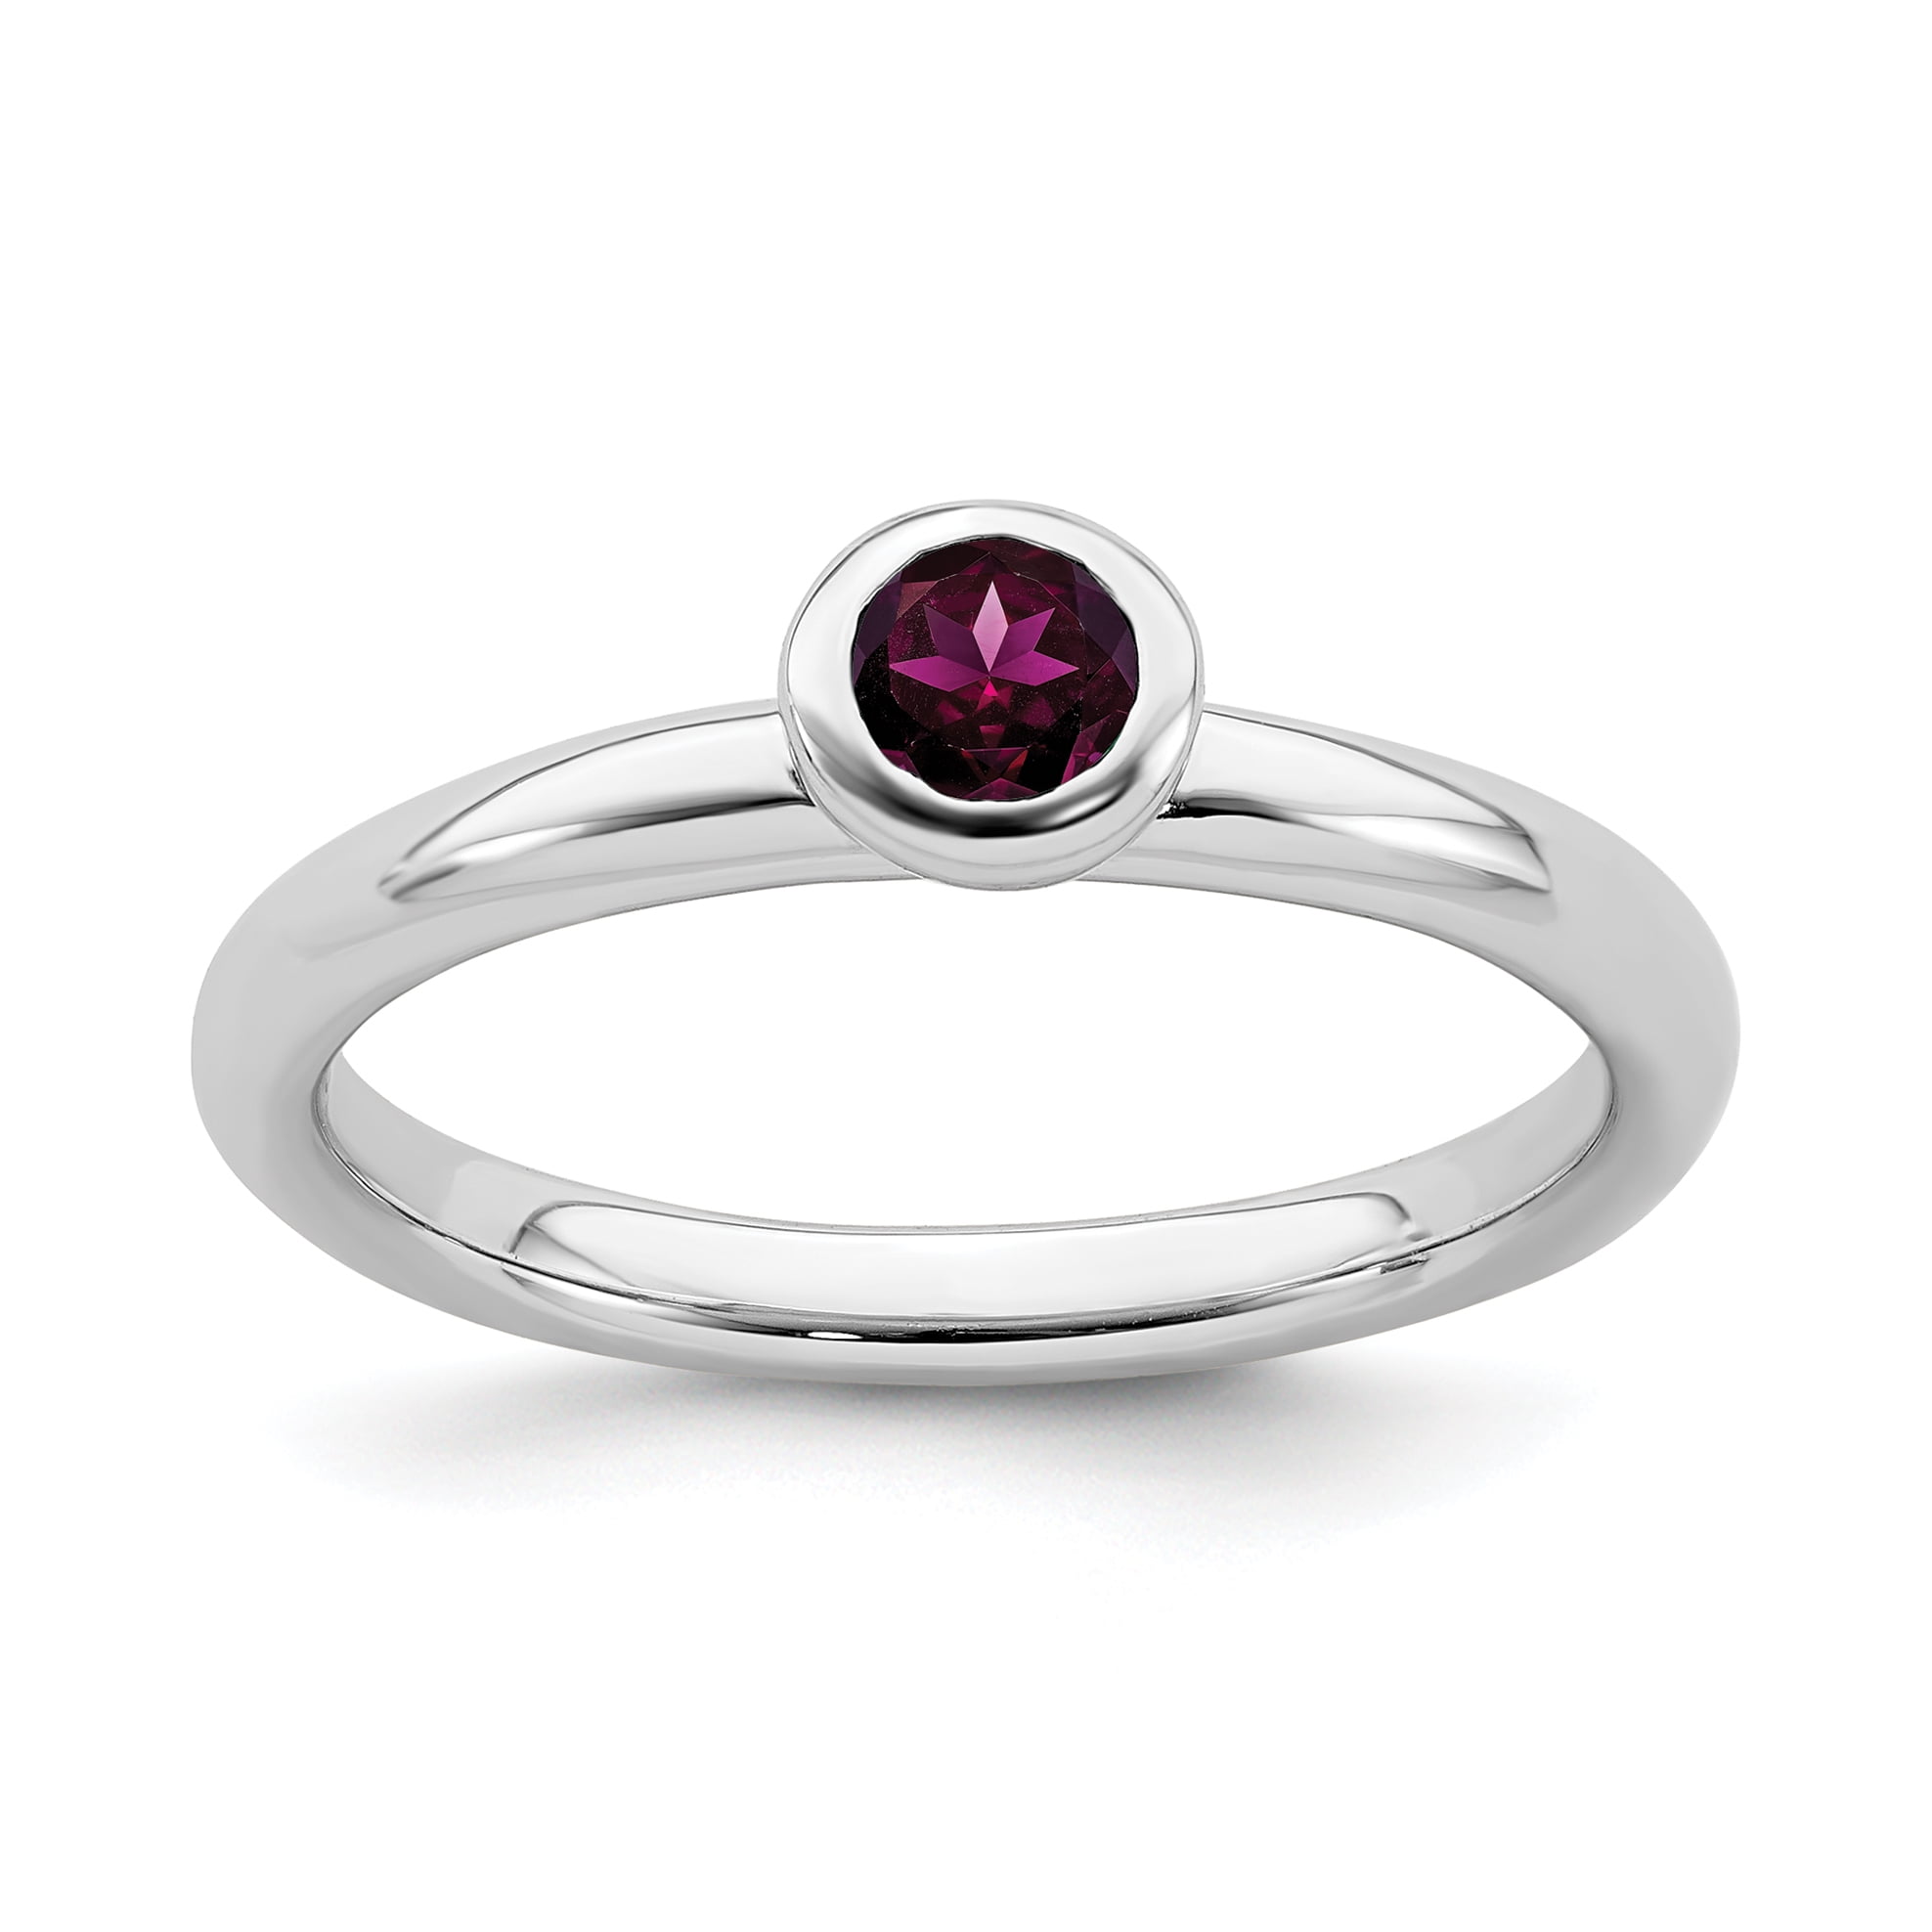 Details about   925 Sterling Silver Natural Round Cut Rhodolite Gemstone Ring US Size 4-8 